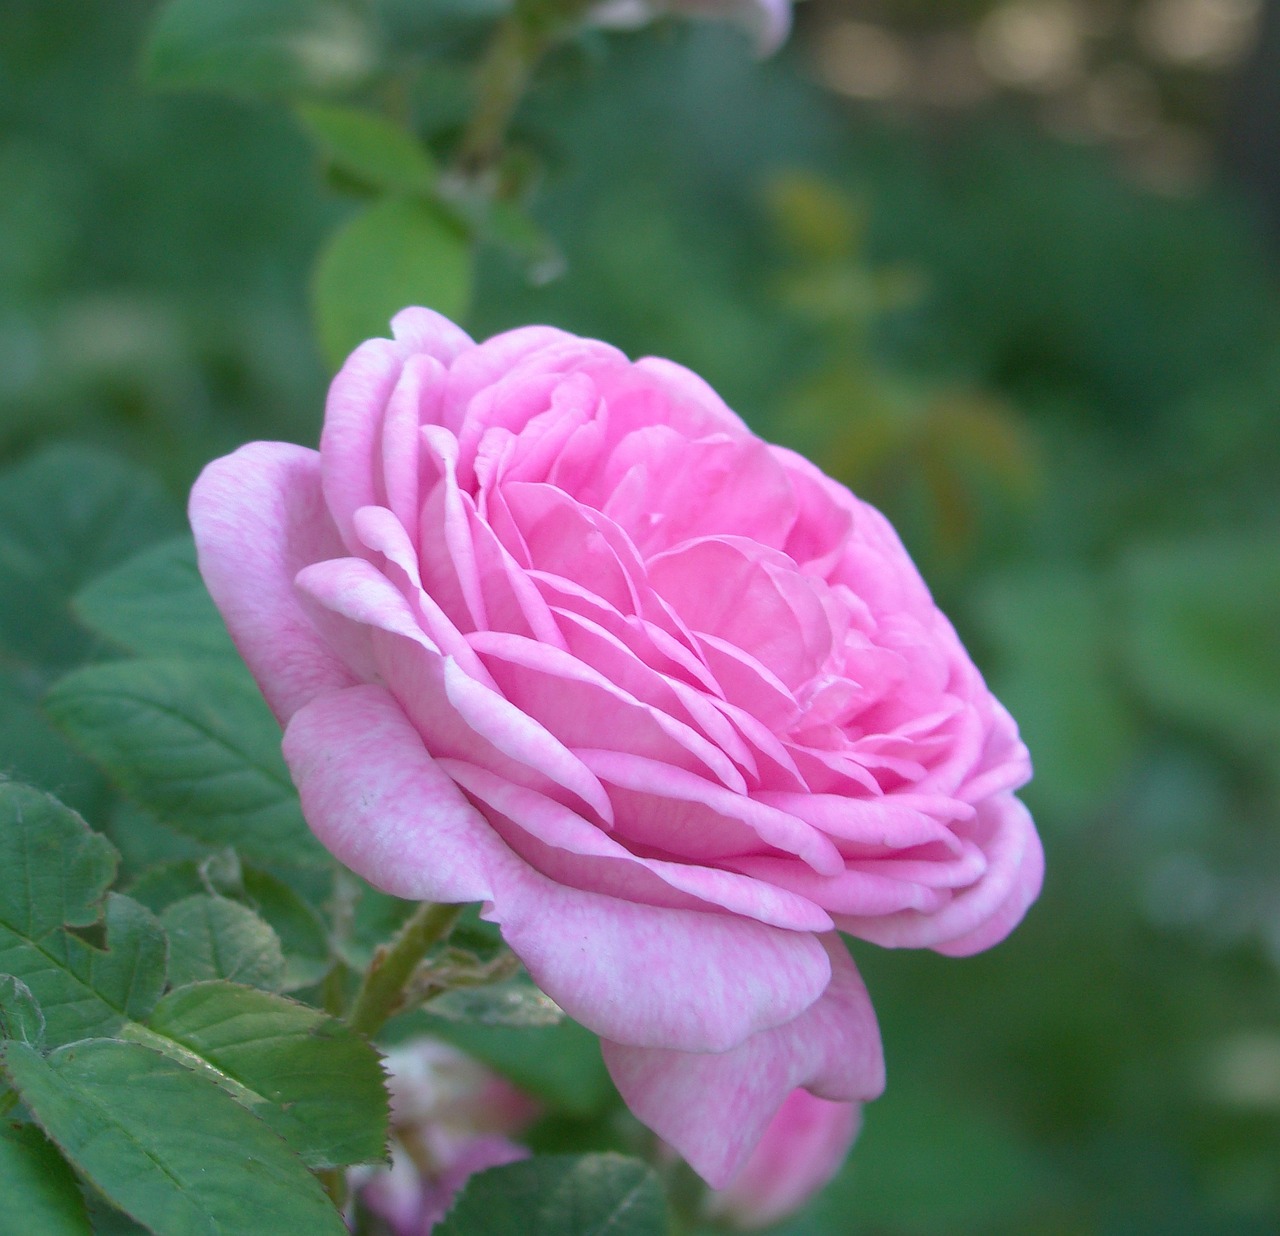 a close up of a pink rose with green leaves, a portrait, flickr, romanticism, an ancient, shishkin, salvia, various posed